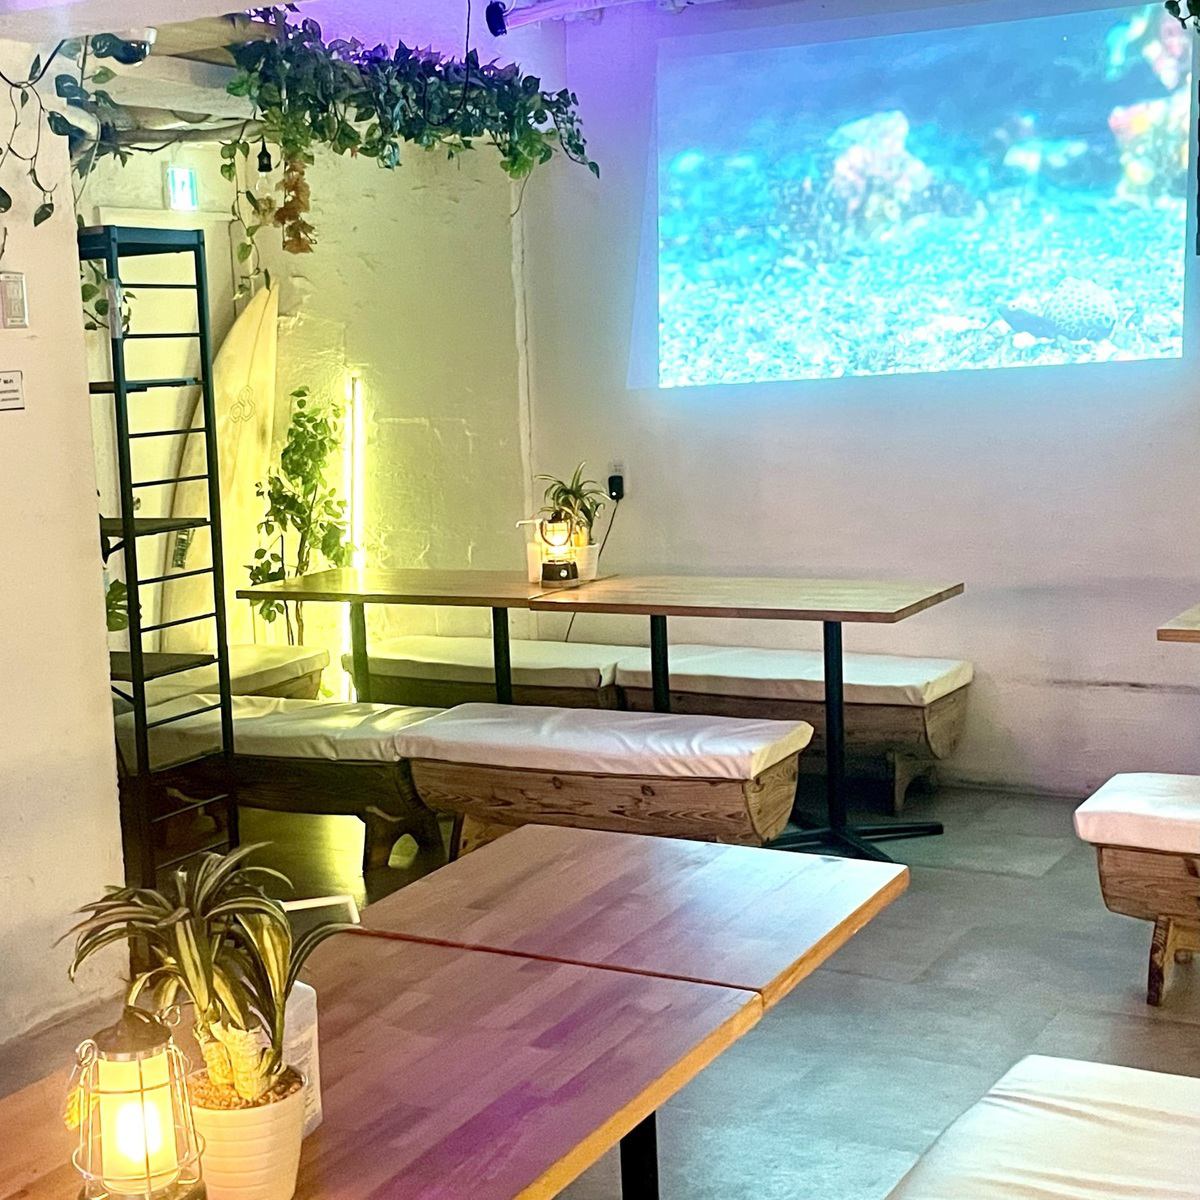 Enjoy a free party at a luxury private izakaya in Shibuya ♪ You can freely use the layout of the projector, microphone, audio equipment, etc.! There are 6 affiliated private izakayas in Shibuya ★